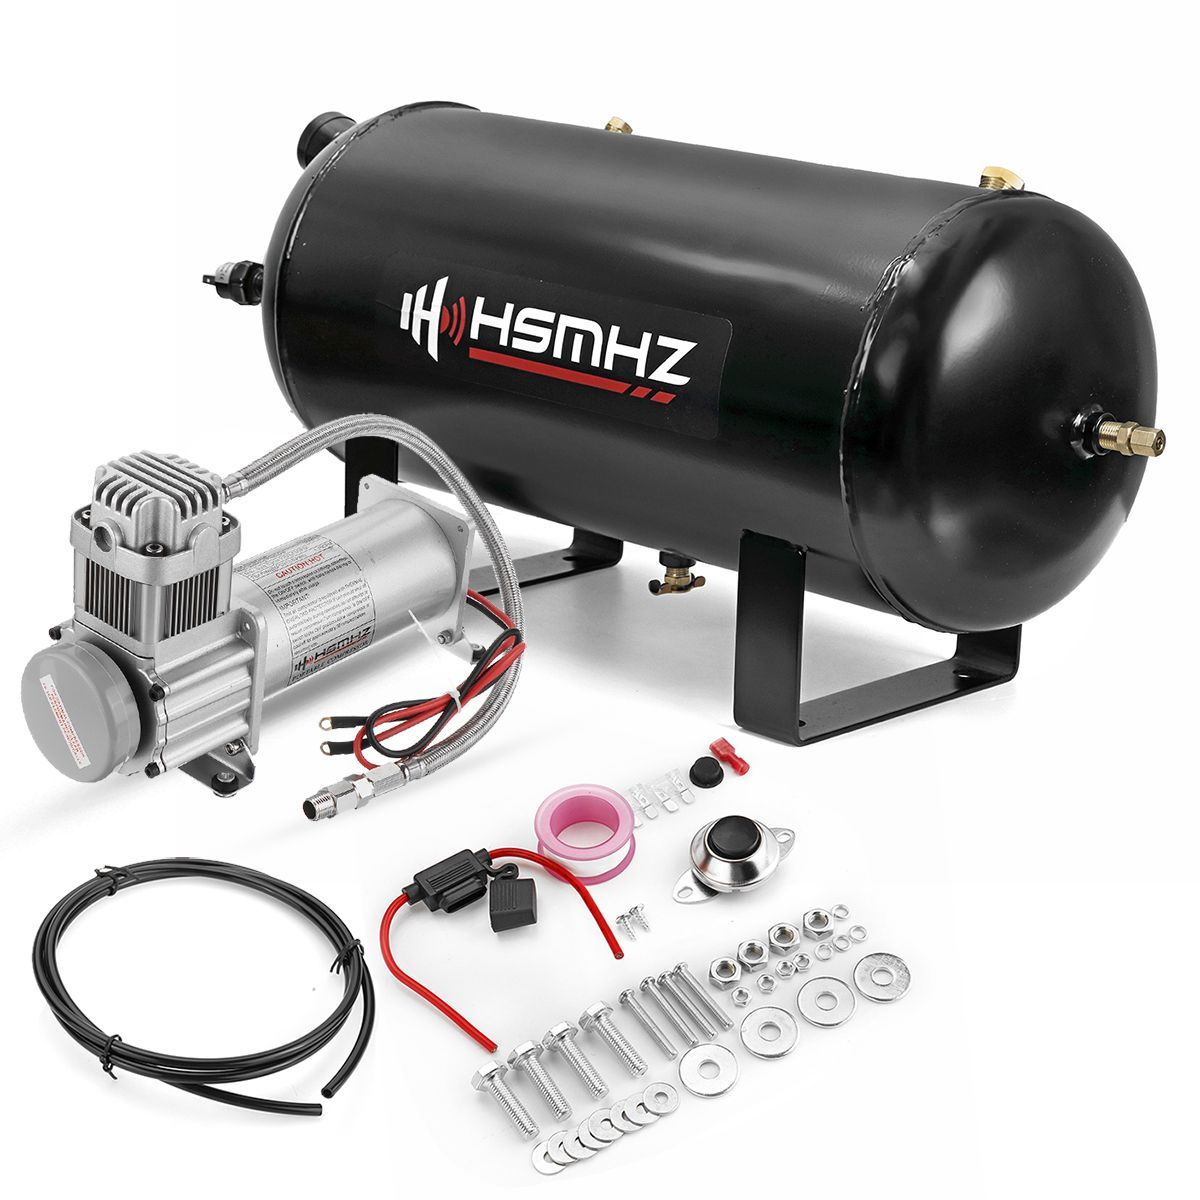 5-Gal-Air-Tank-200-PSI-Compressor-Onboard-System-Kit-For-Train-Truck-RV-Horn-12V-1516296